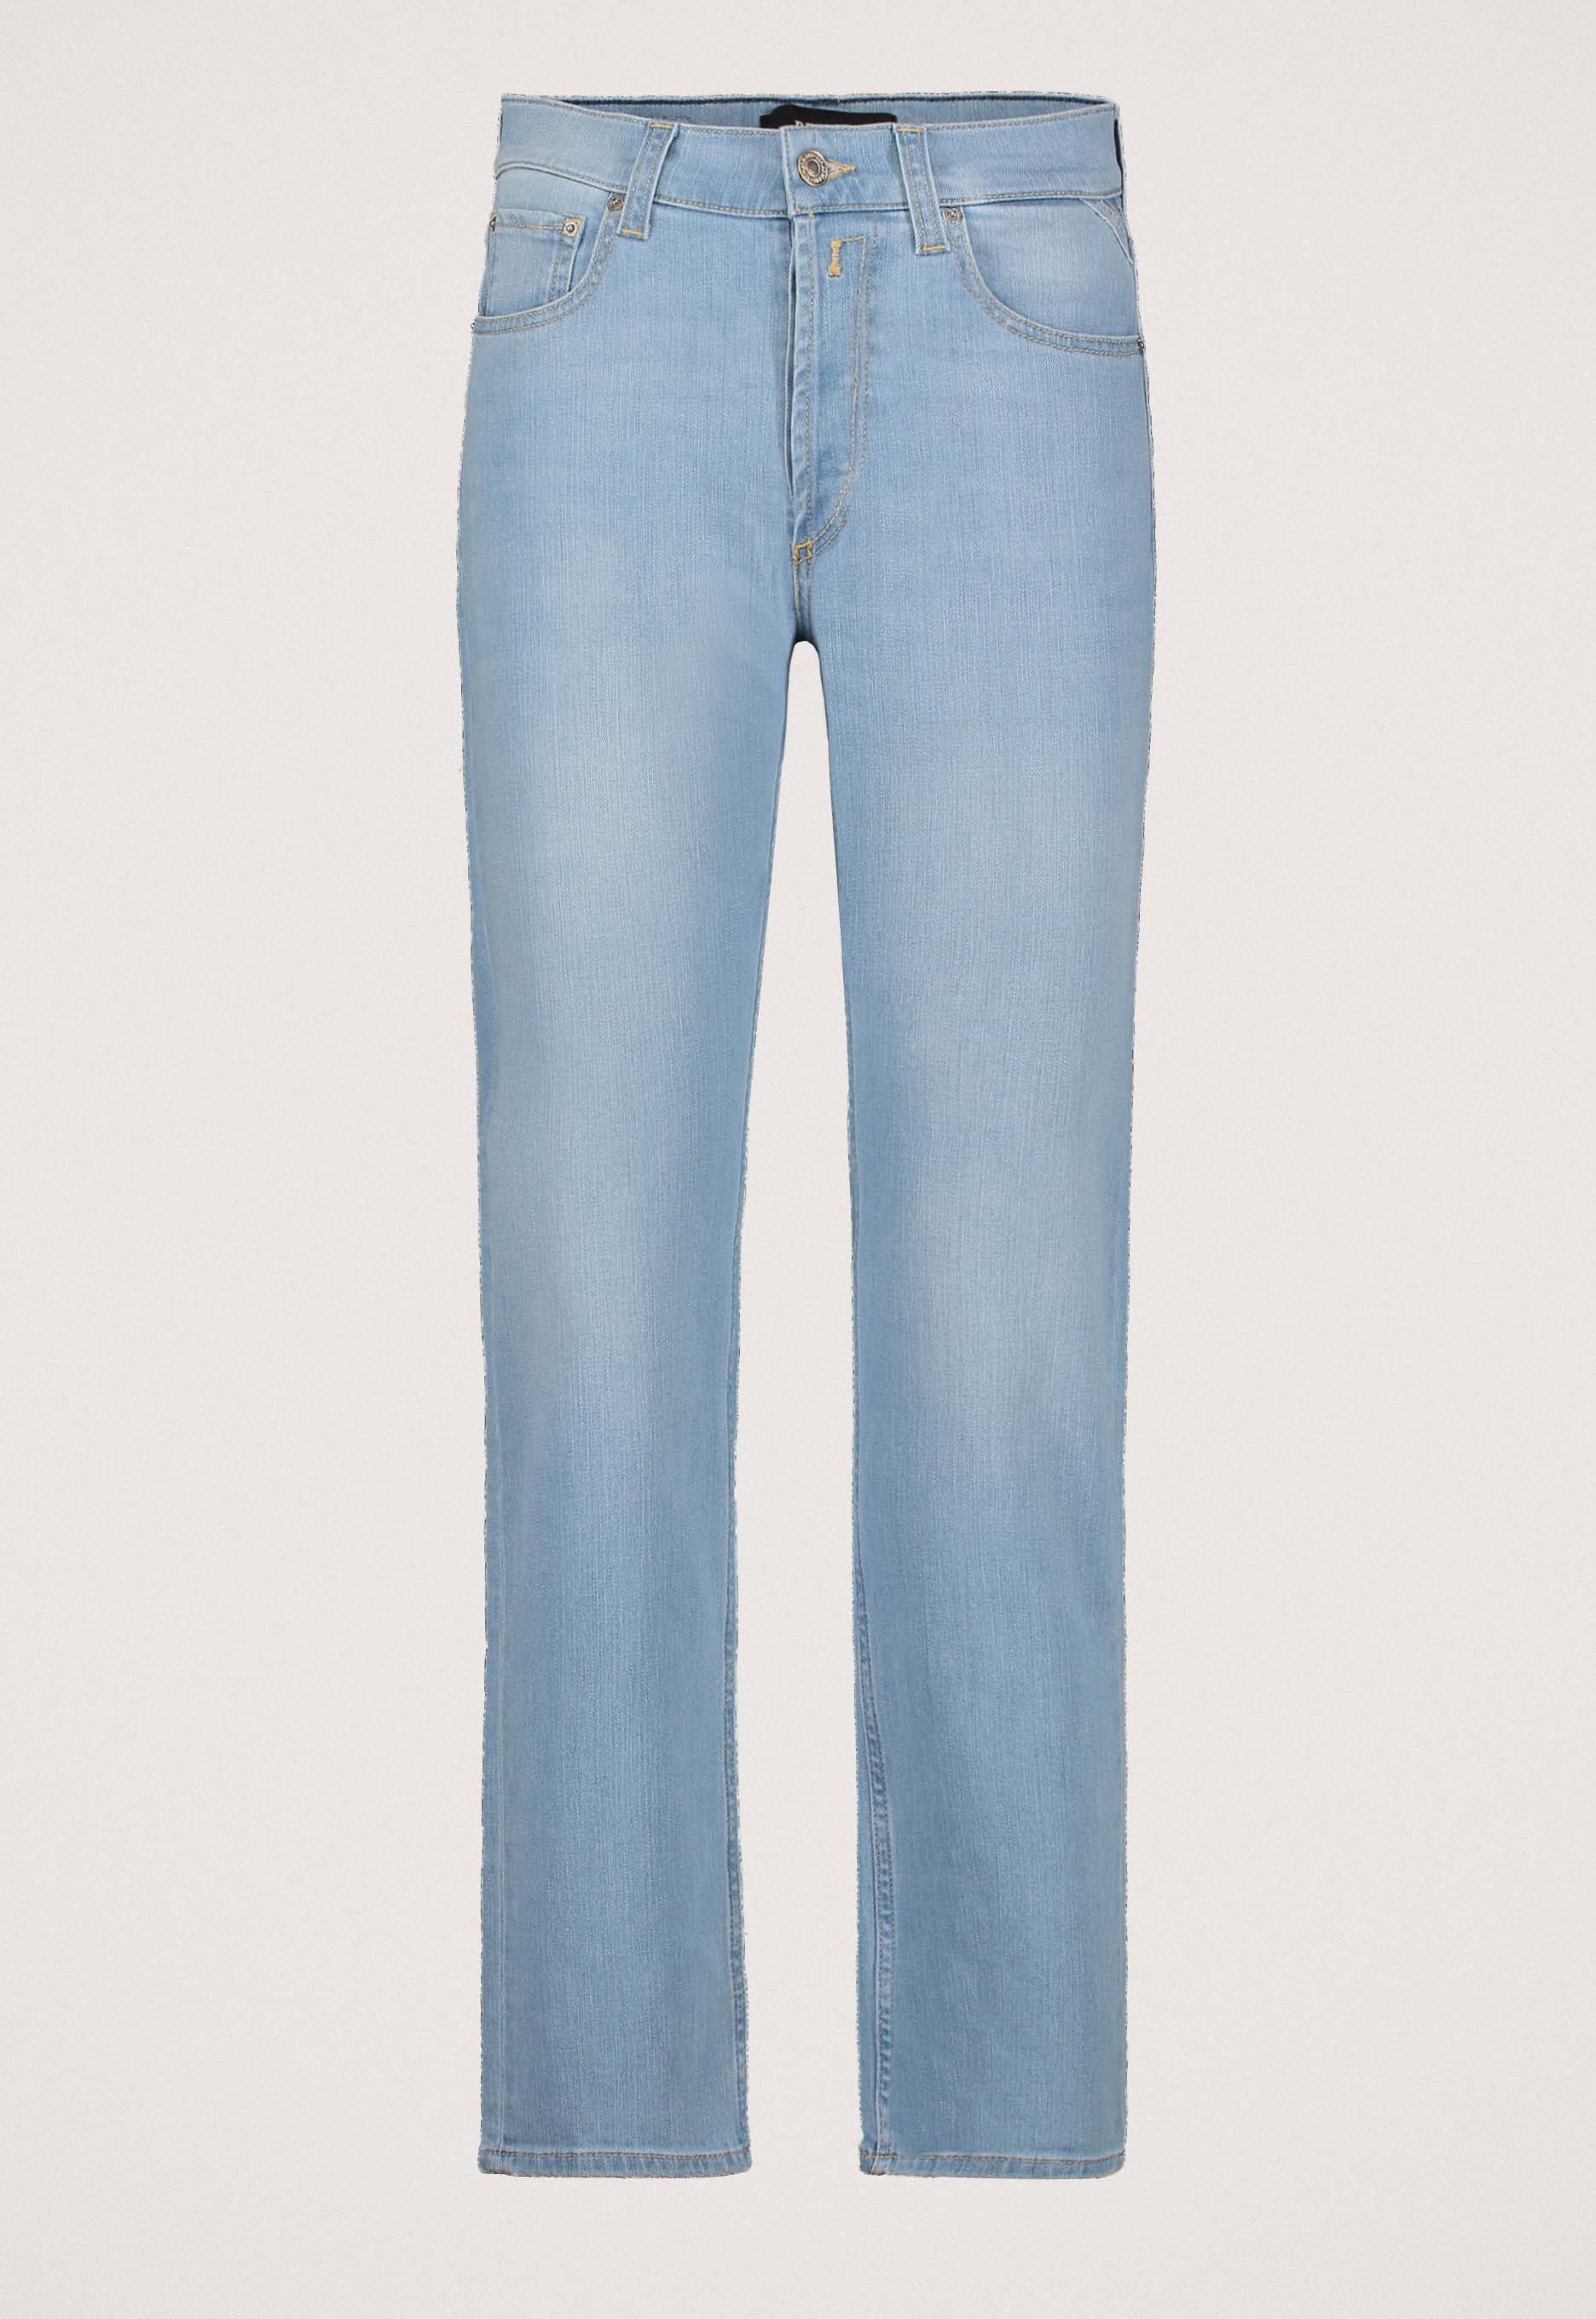 Replay Maijke Straight Fit Jeans